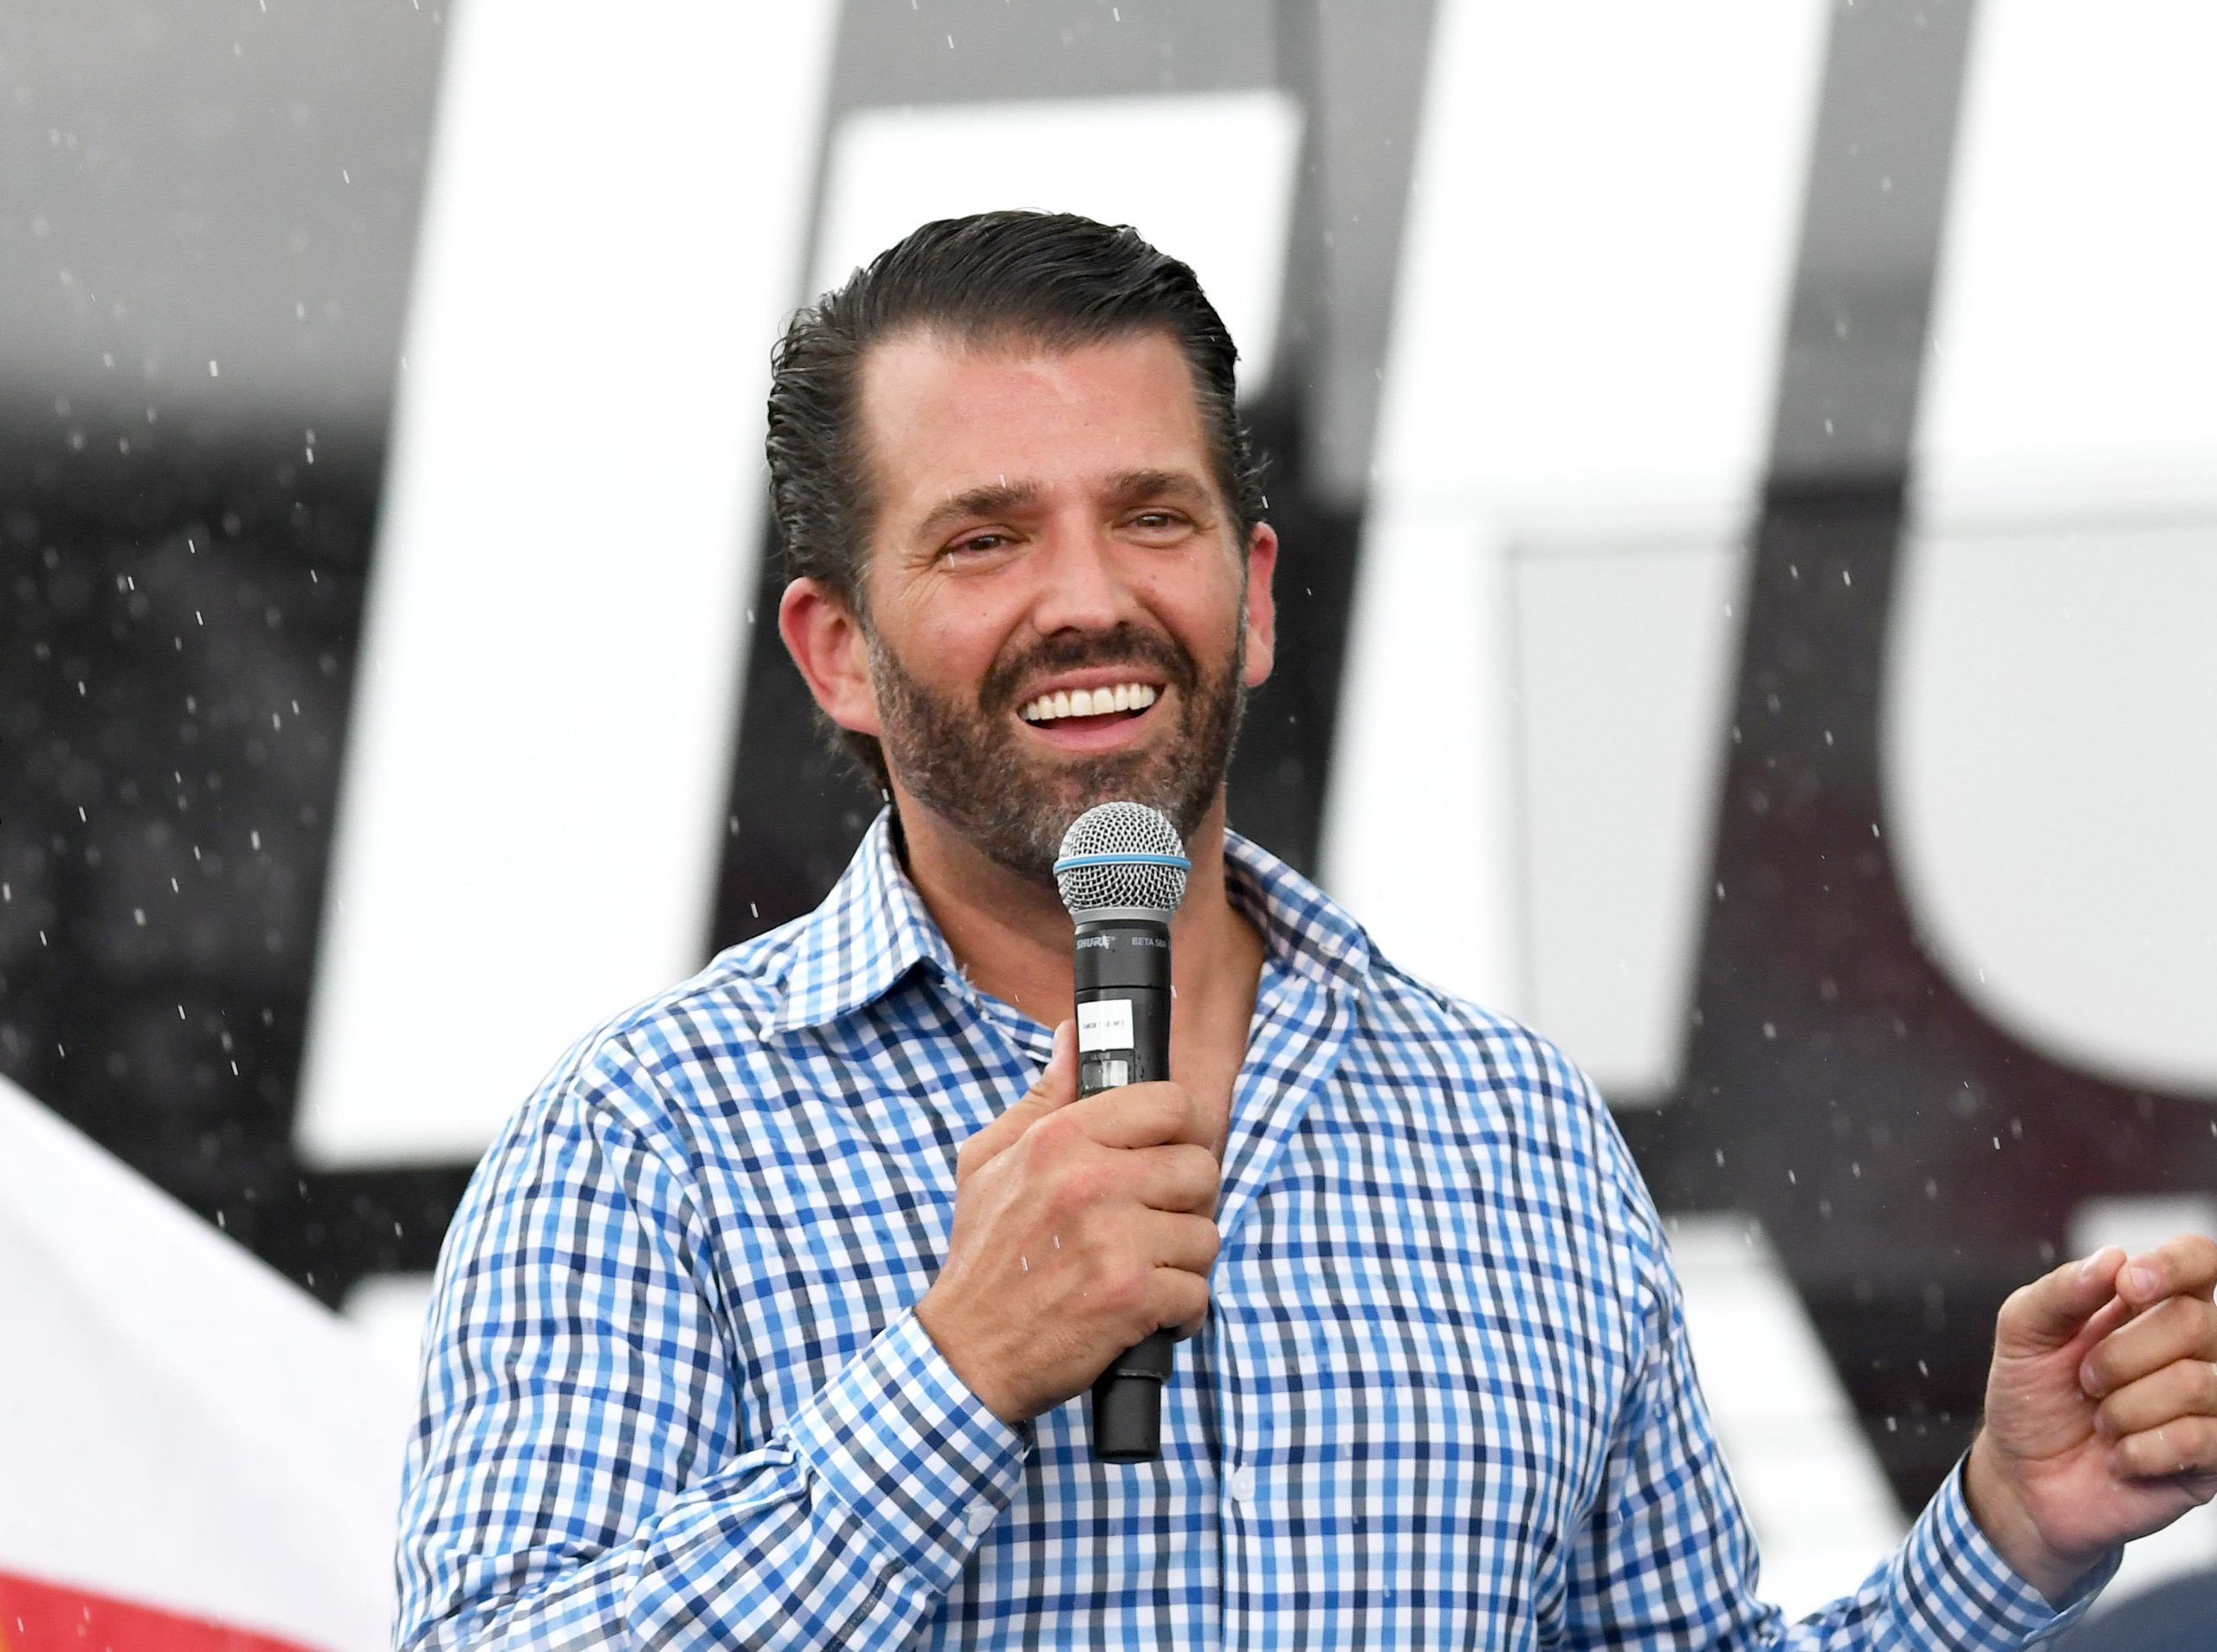 Donald Trump Jr. dismisses Covid deaths as ‘virtually nothing’